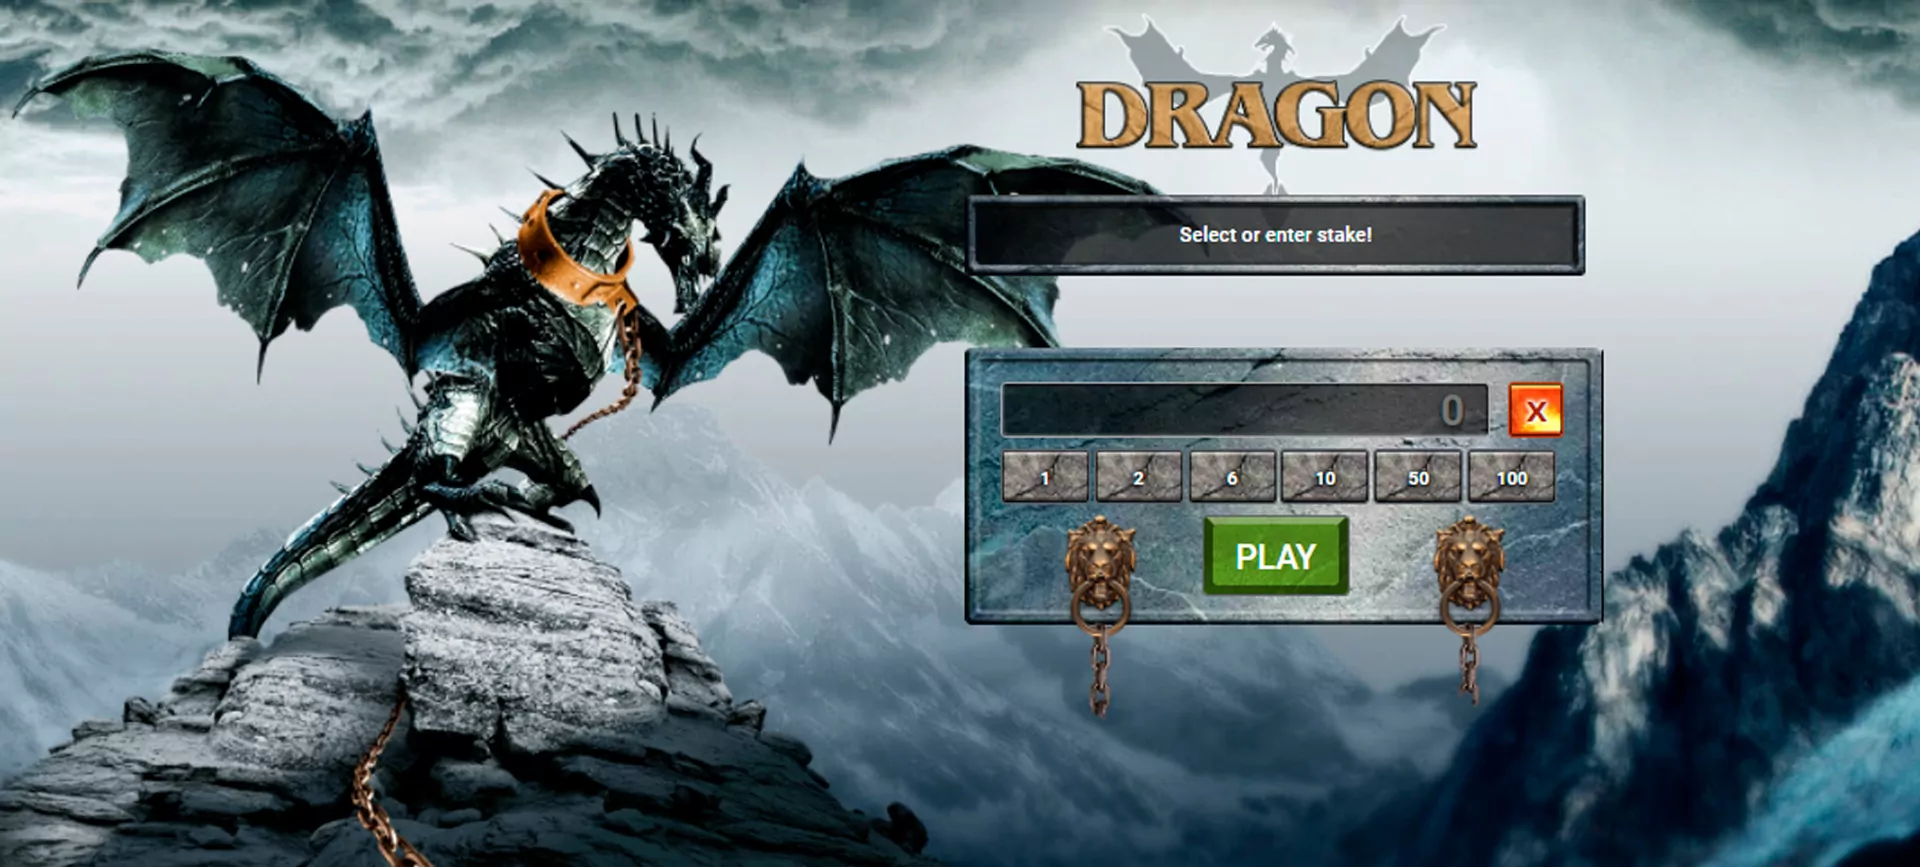 Play online in the Dragon game.